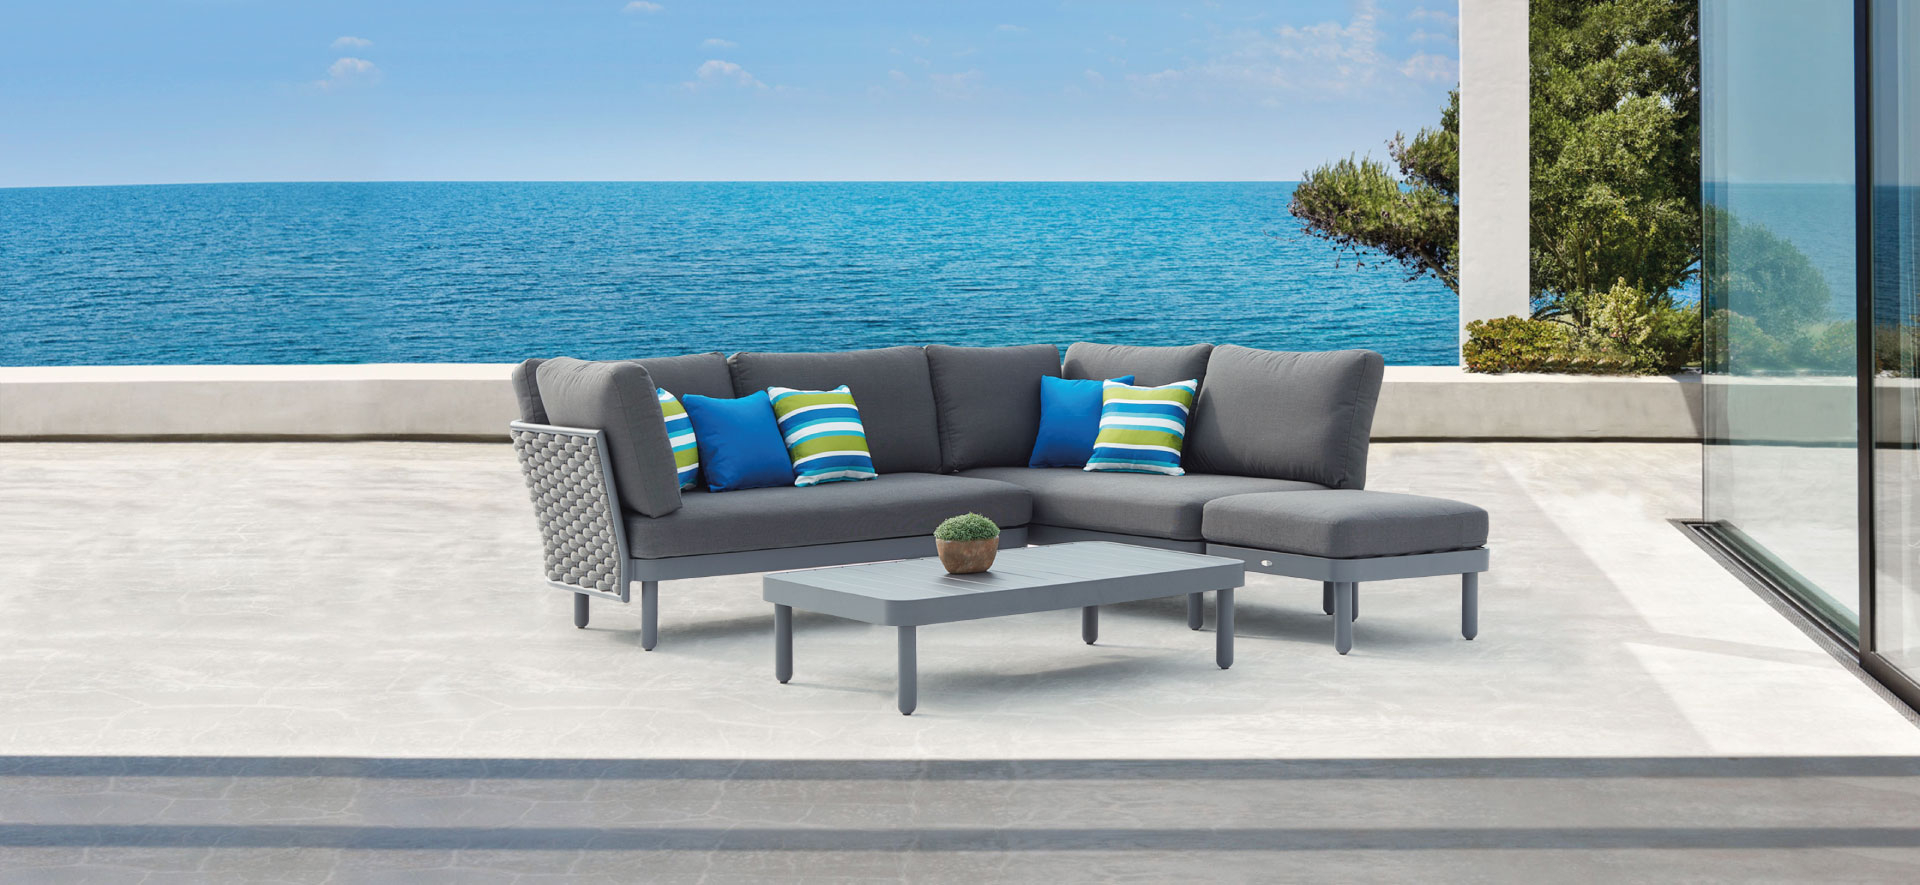 A Taste Of Milan With Outdoor Furniture In New Zealand inside measurements 1920 X 885